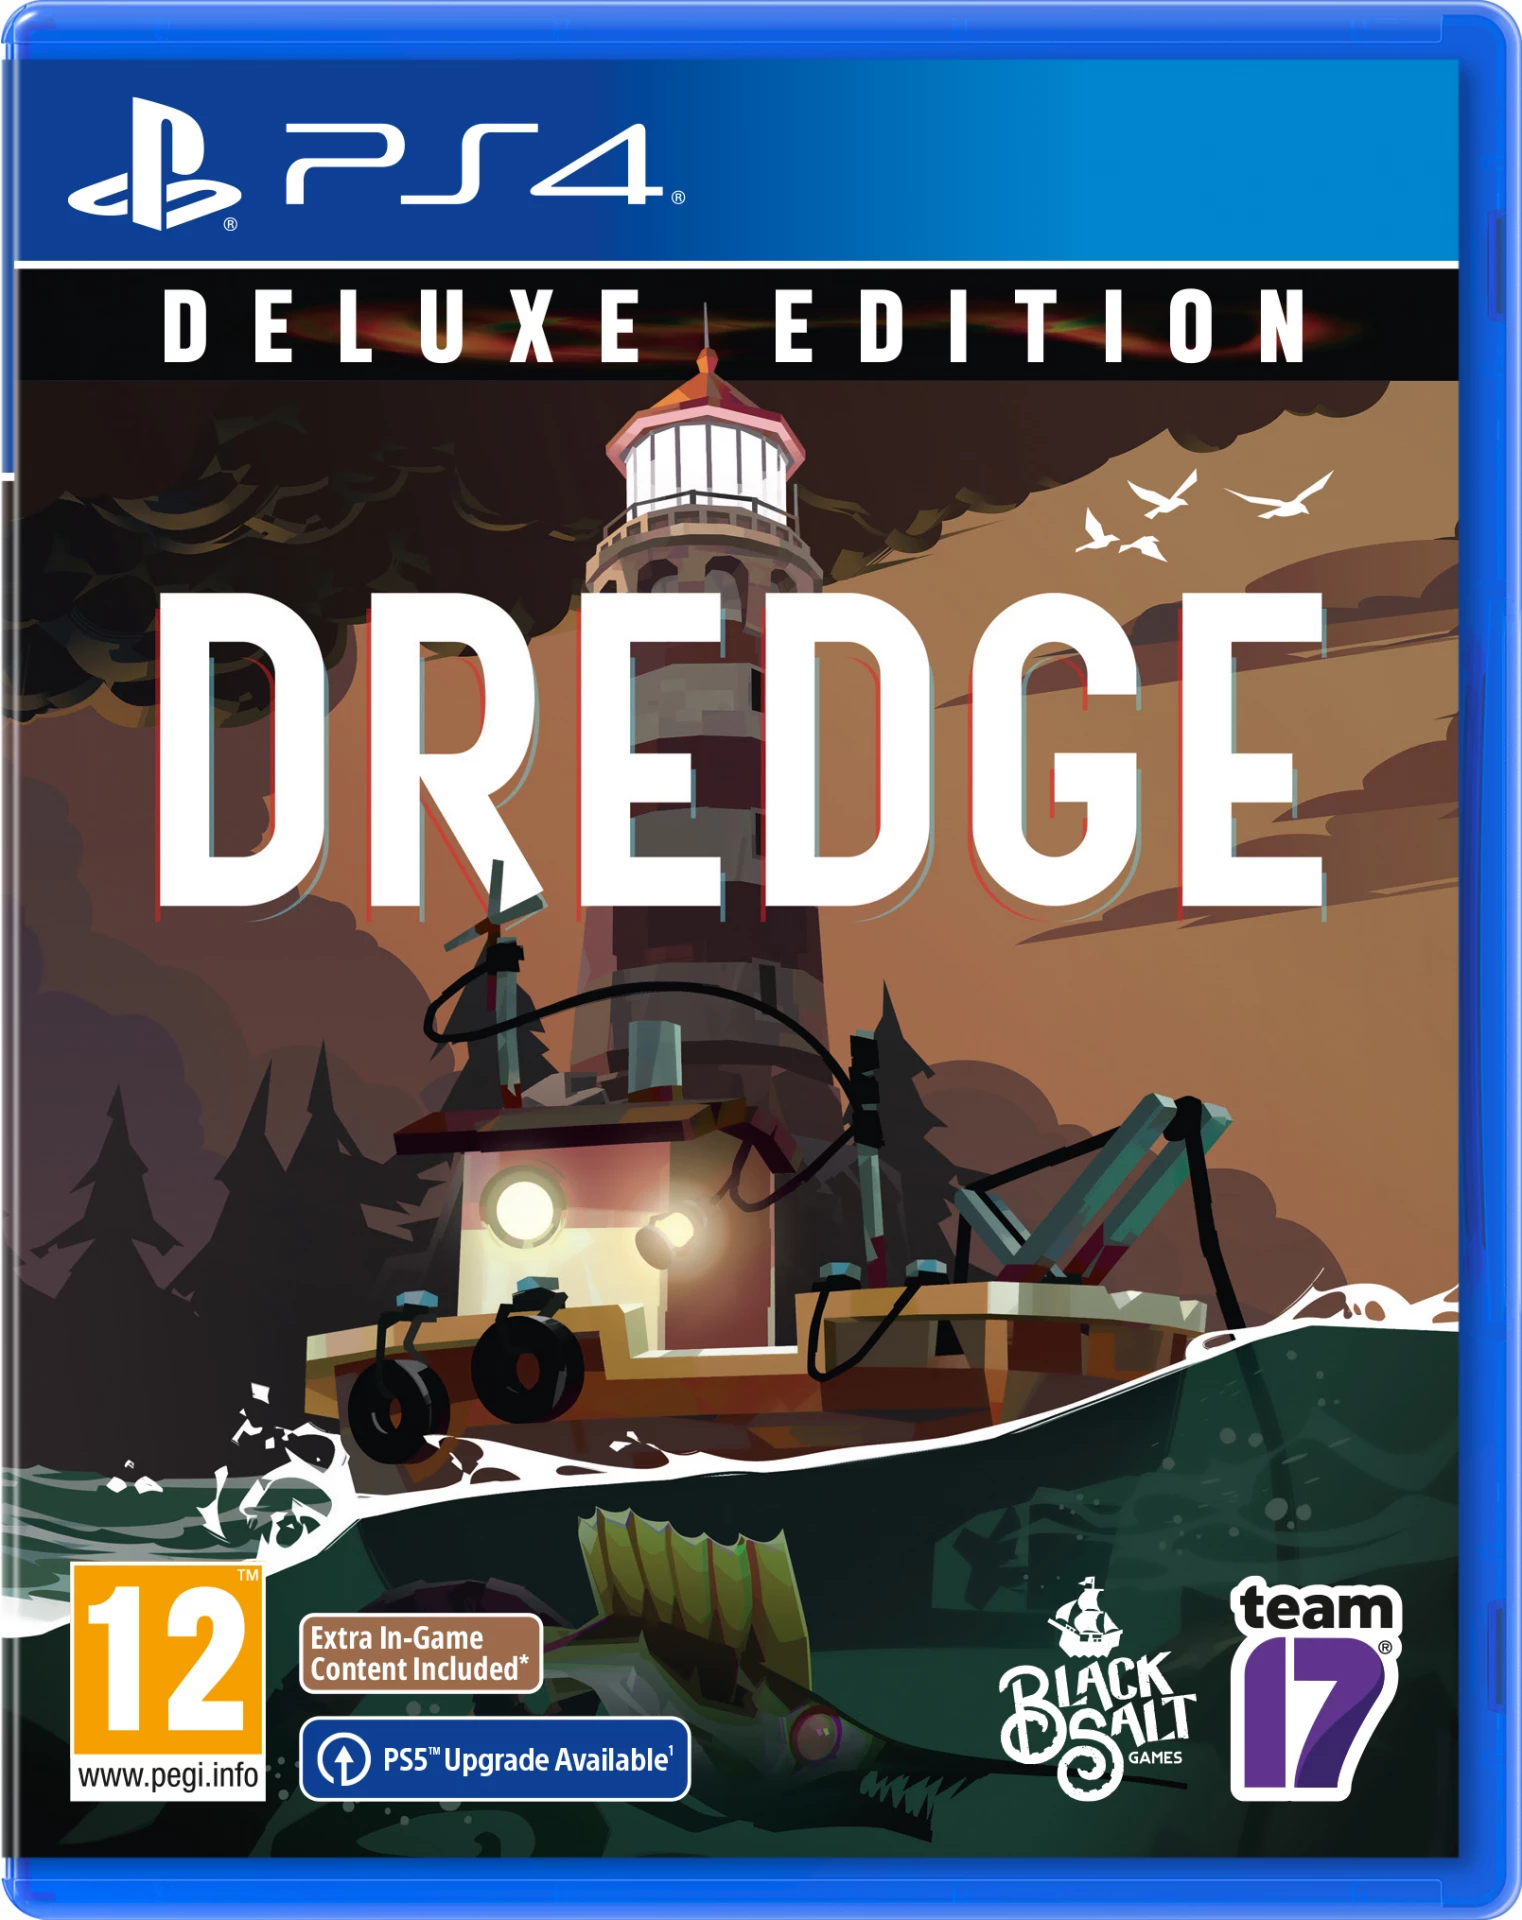 Dredge - Deluxe Edition (PS4), Team 17